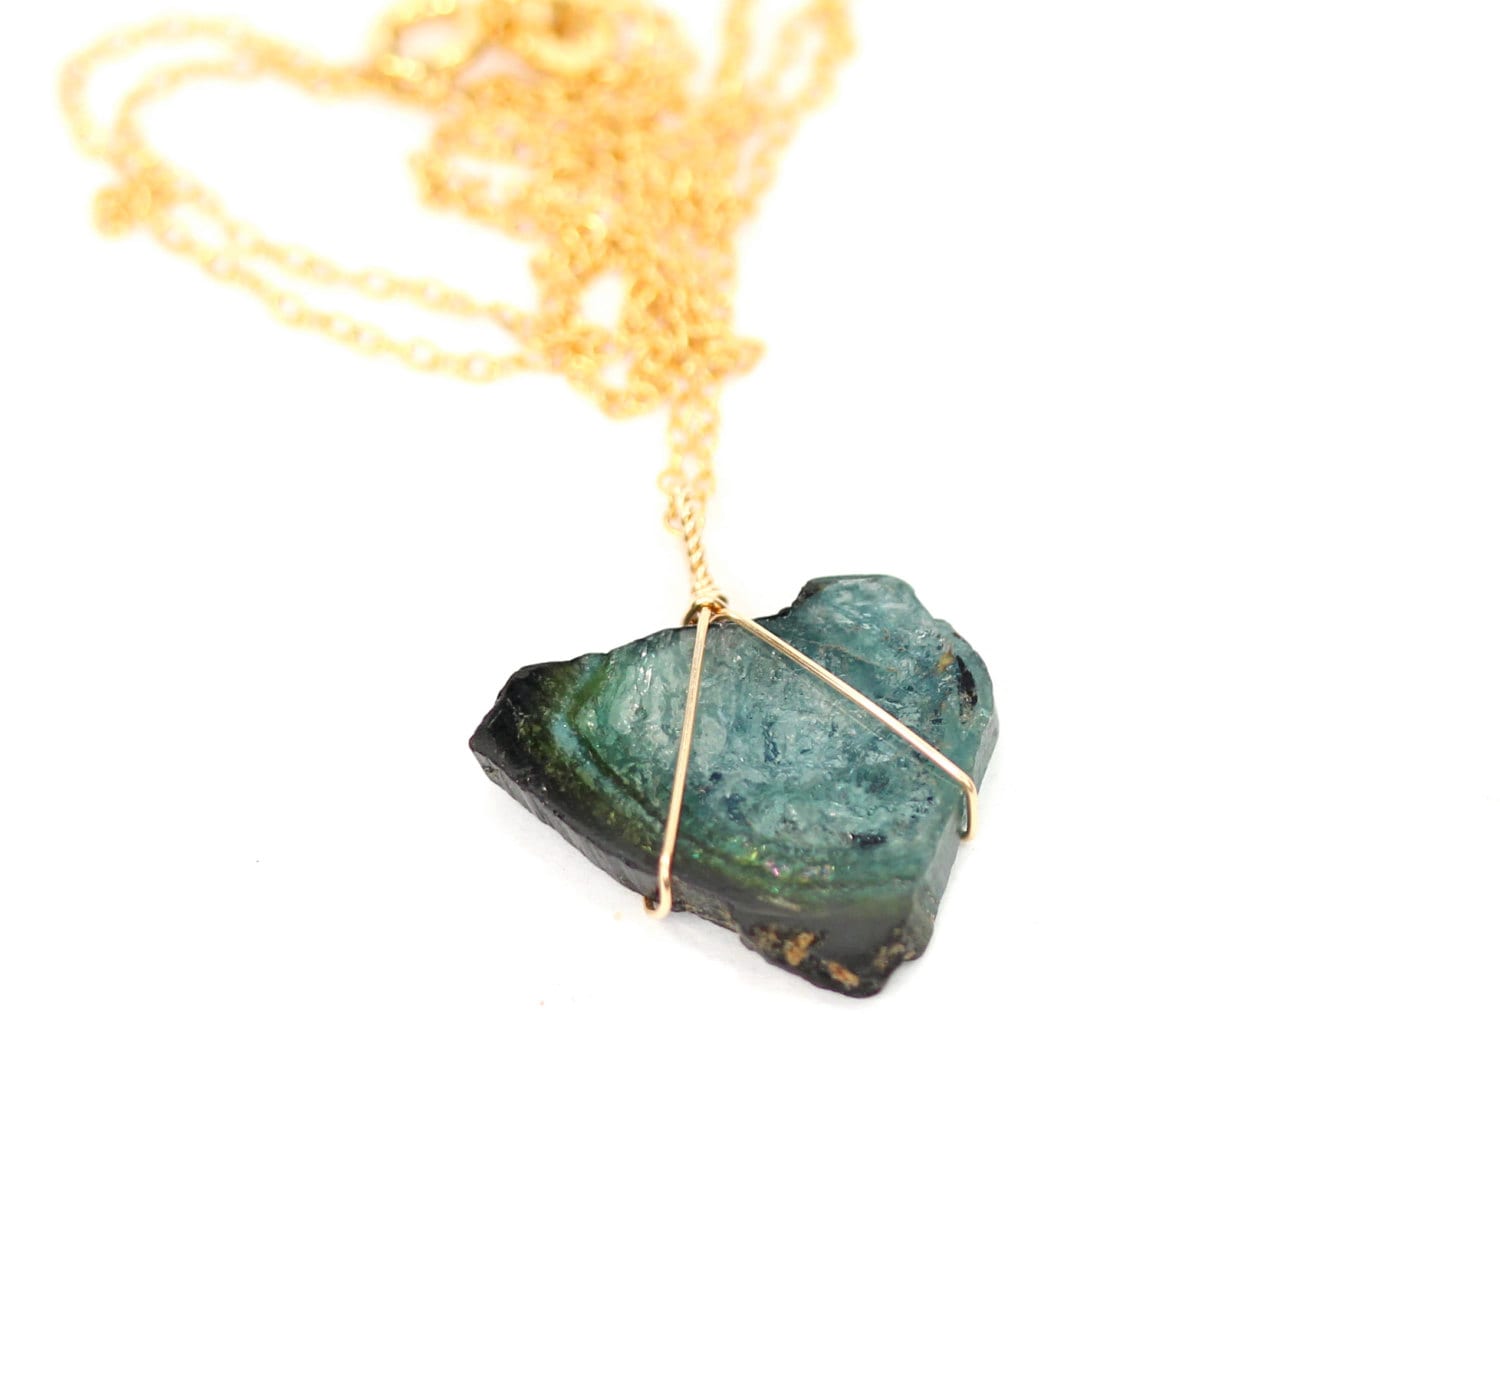 Green tourmaline slice necklace - raw tourmaline necklace - healing crystal necklace - a wire ...